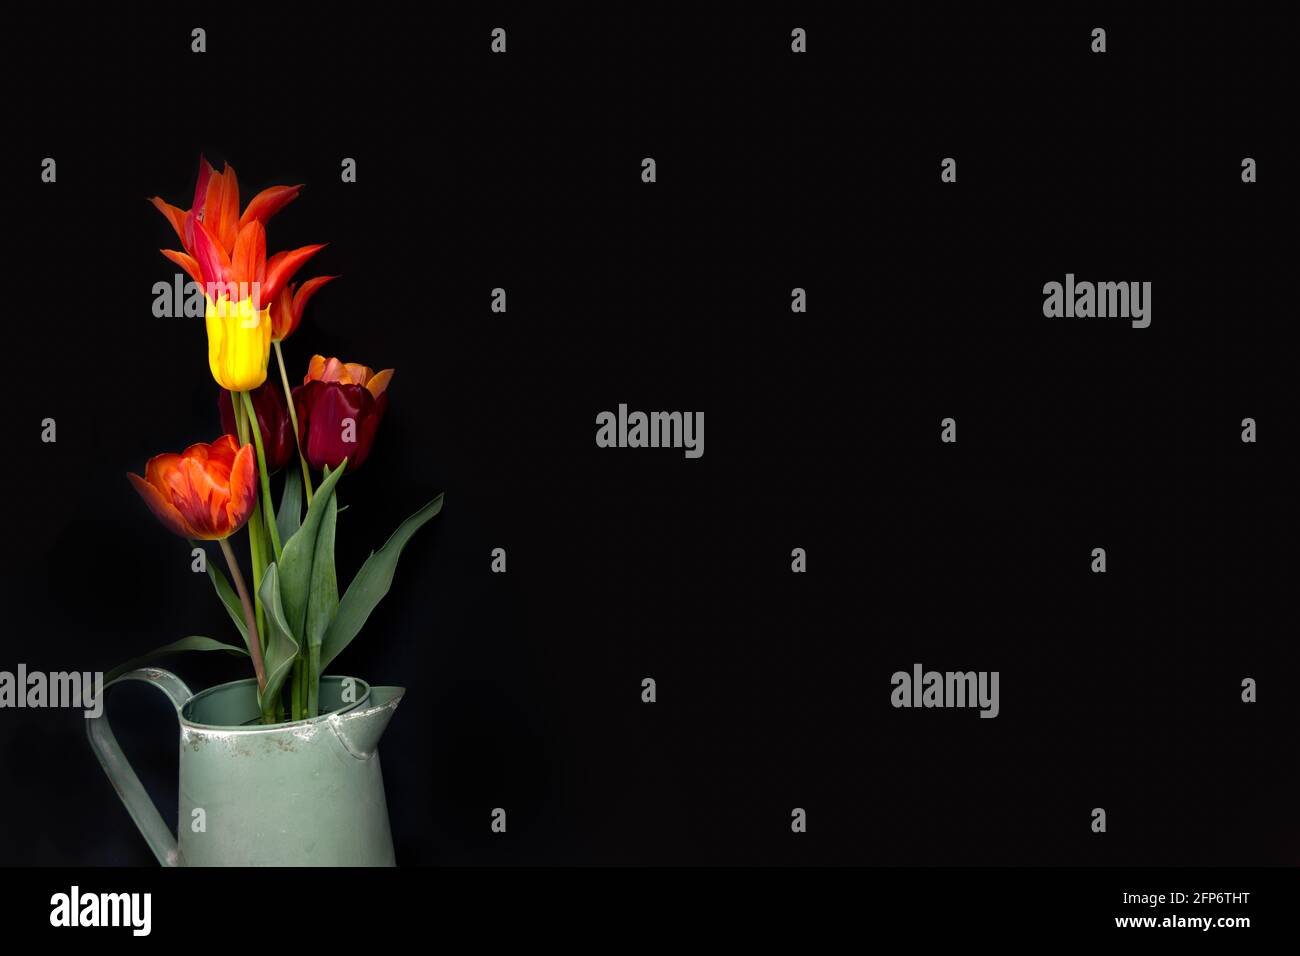 Bunch of colourful tulips on a black background, use as a card or background Stock Photo